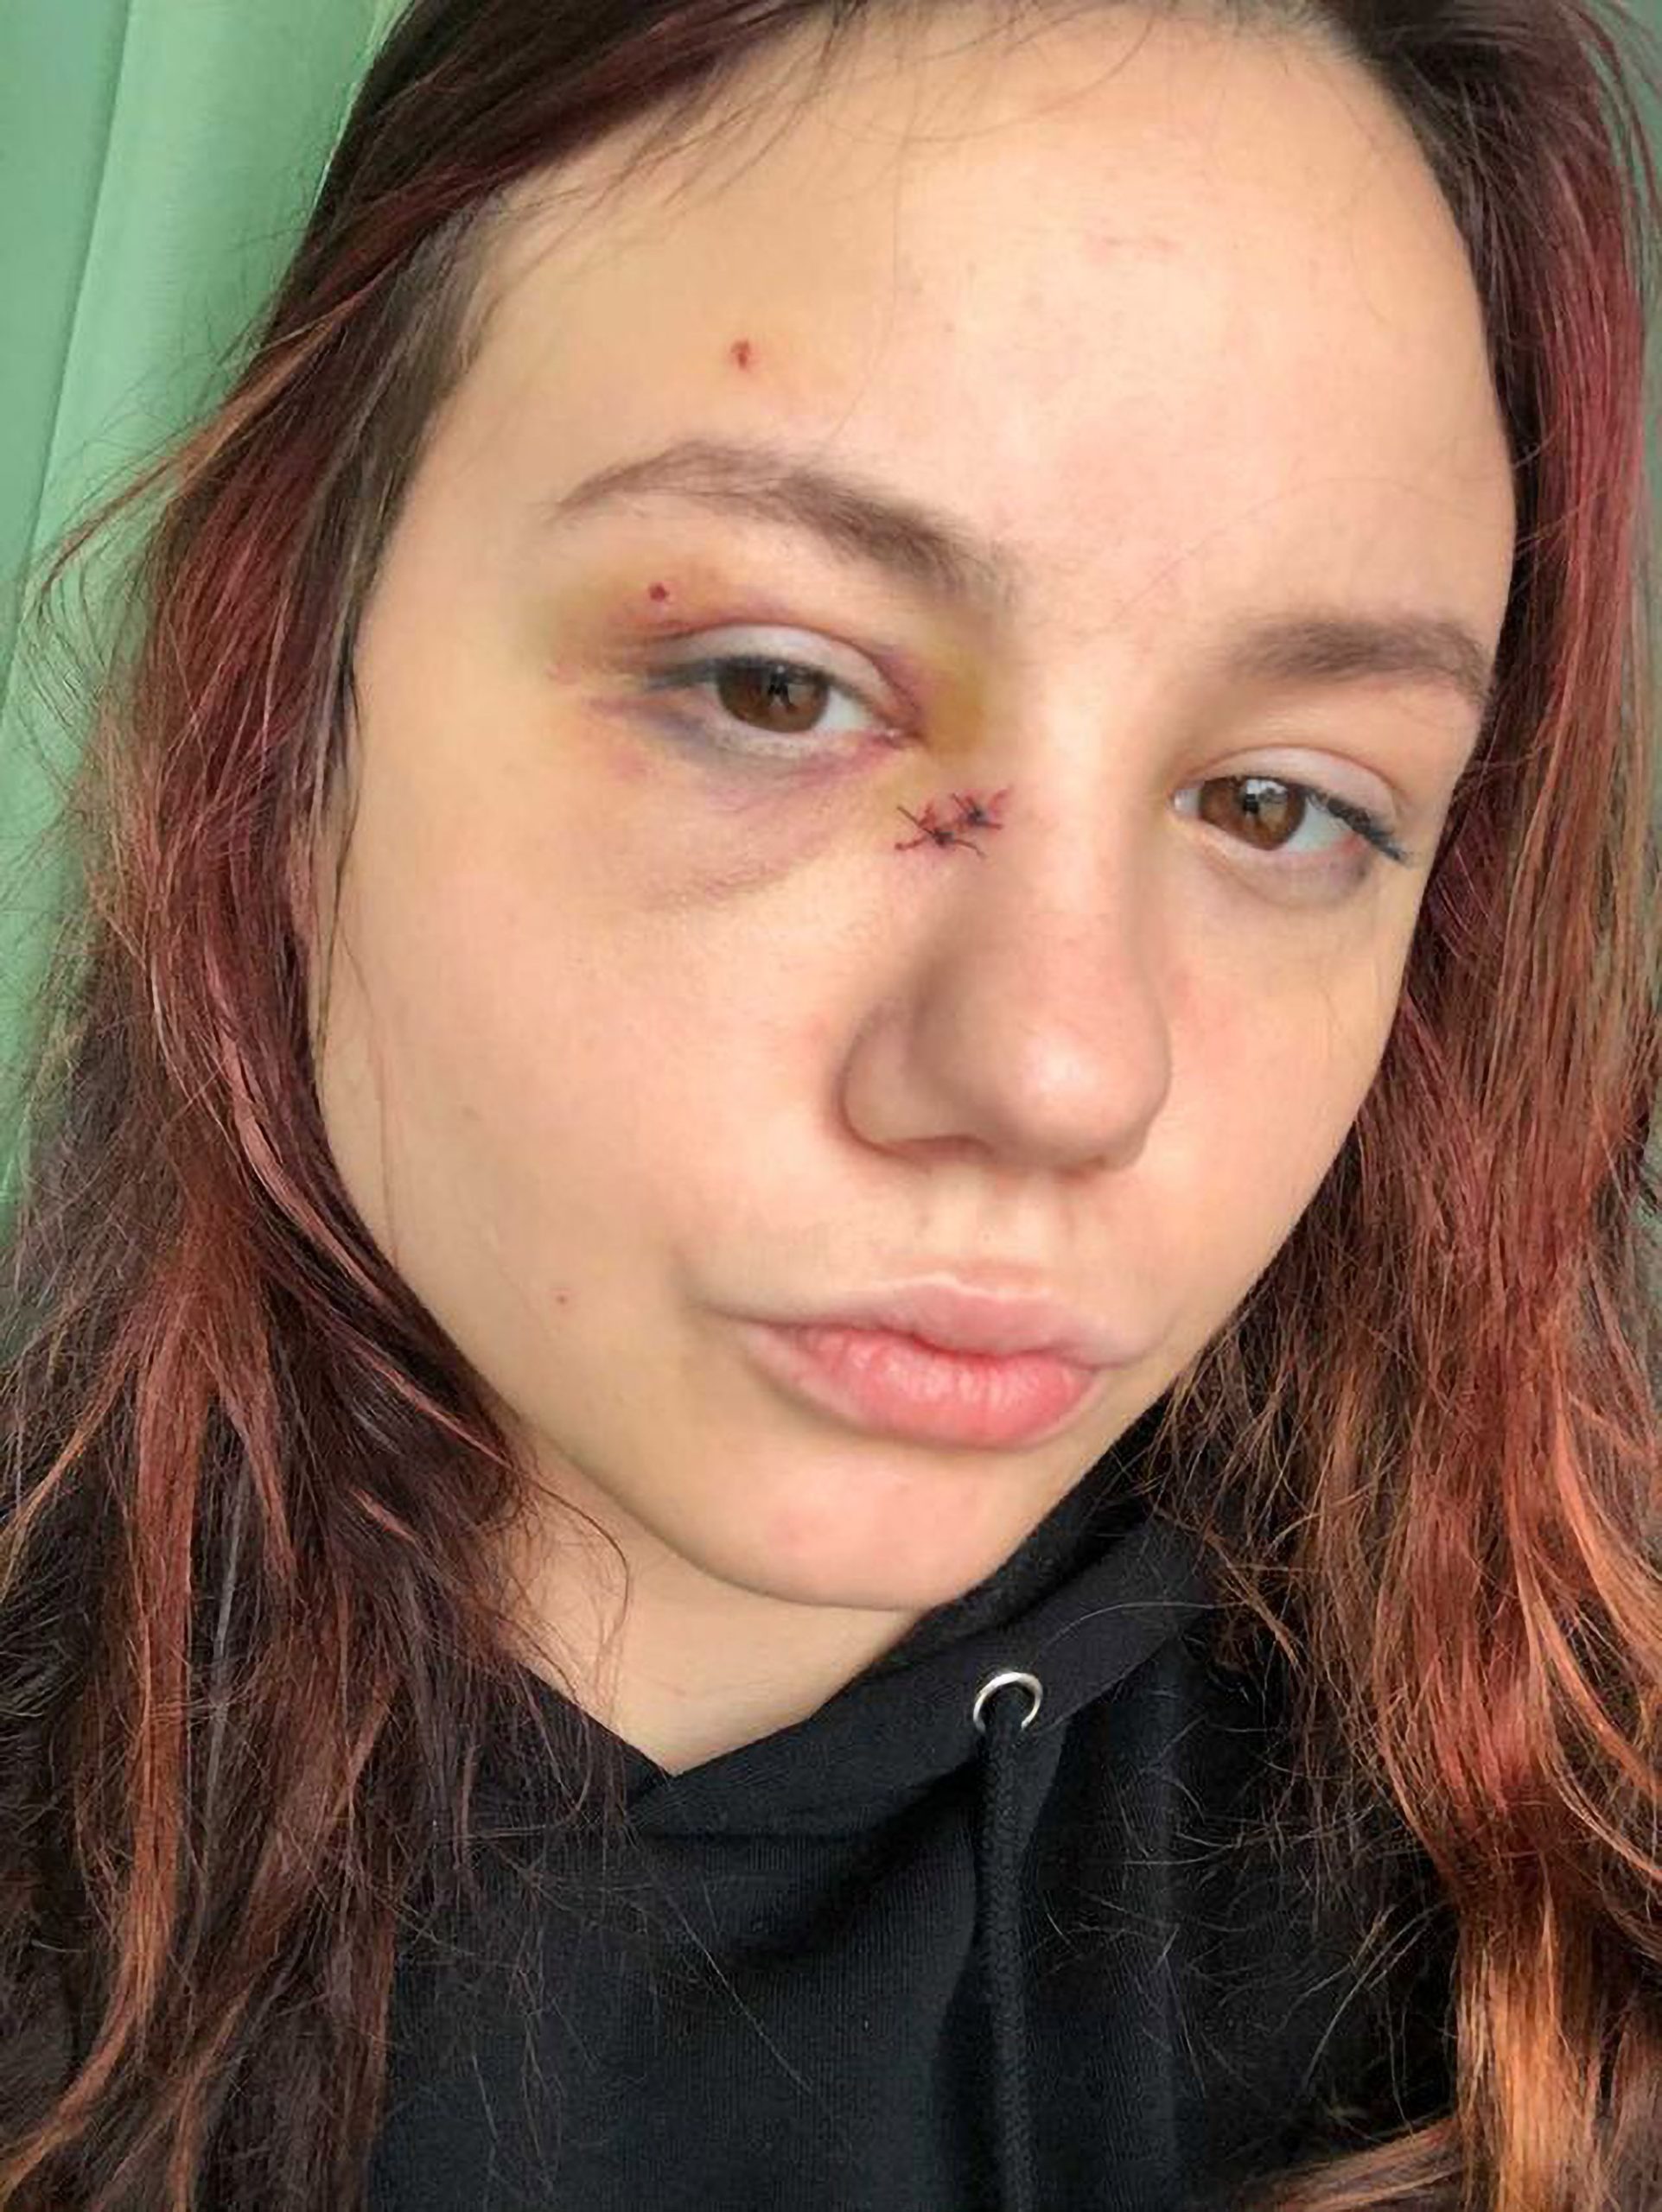 Read more about the article Drunk Neighbour Attacks Influencer With Knife Over Pizza Delivery Row